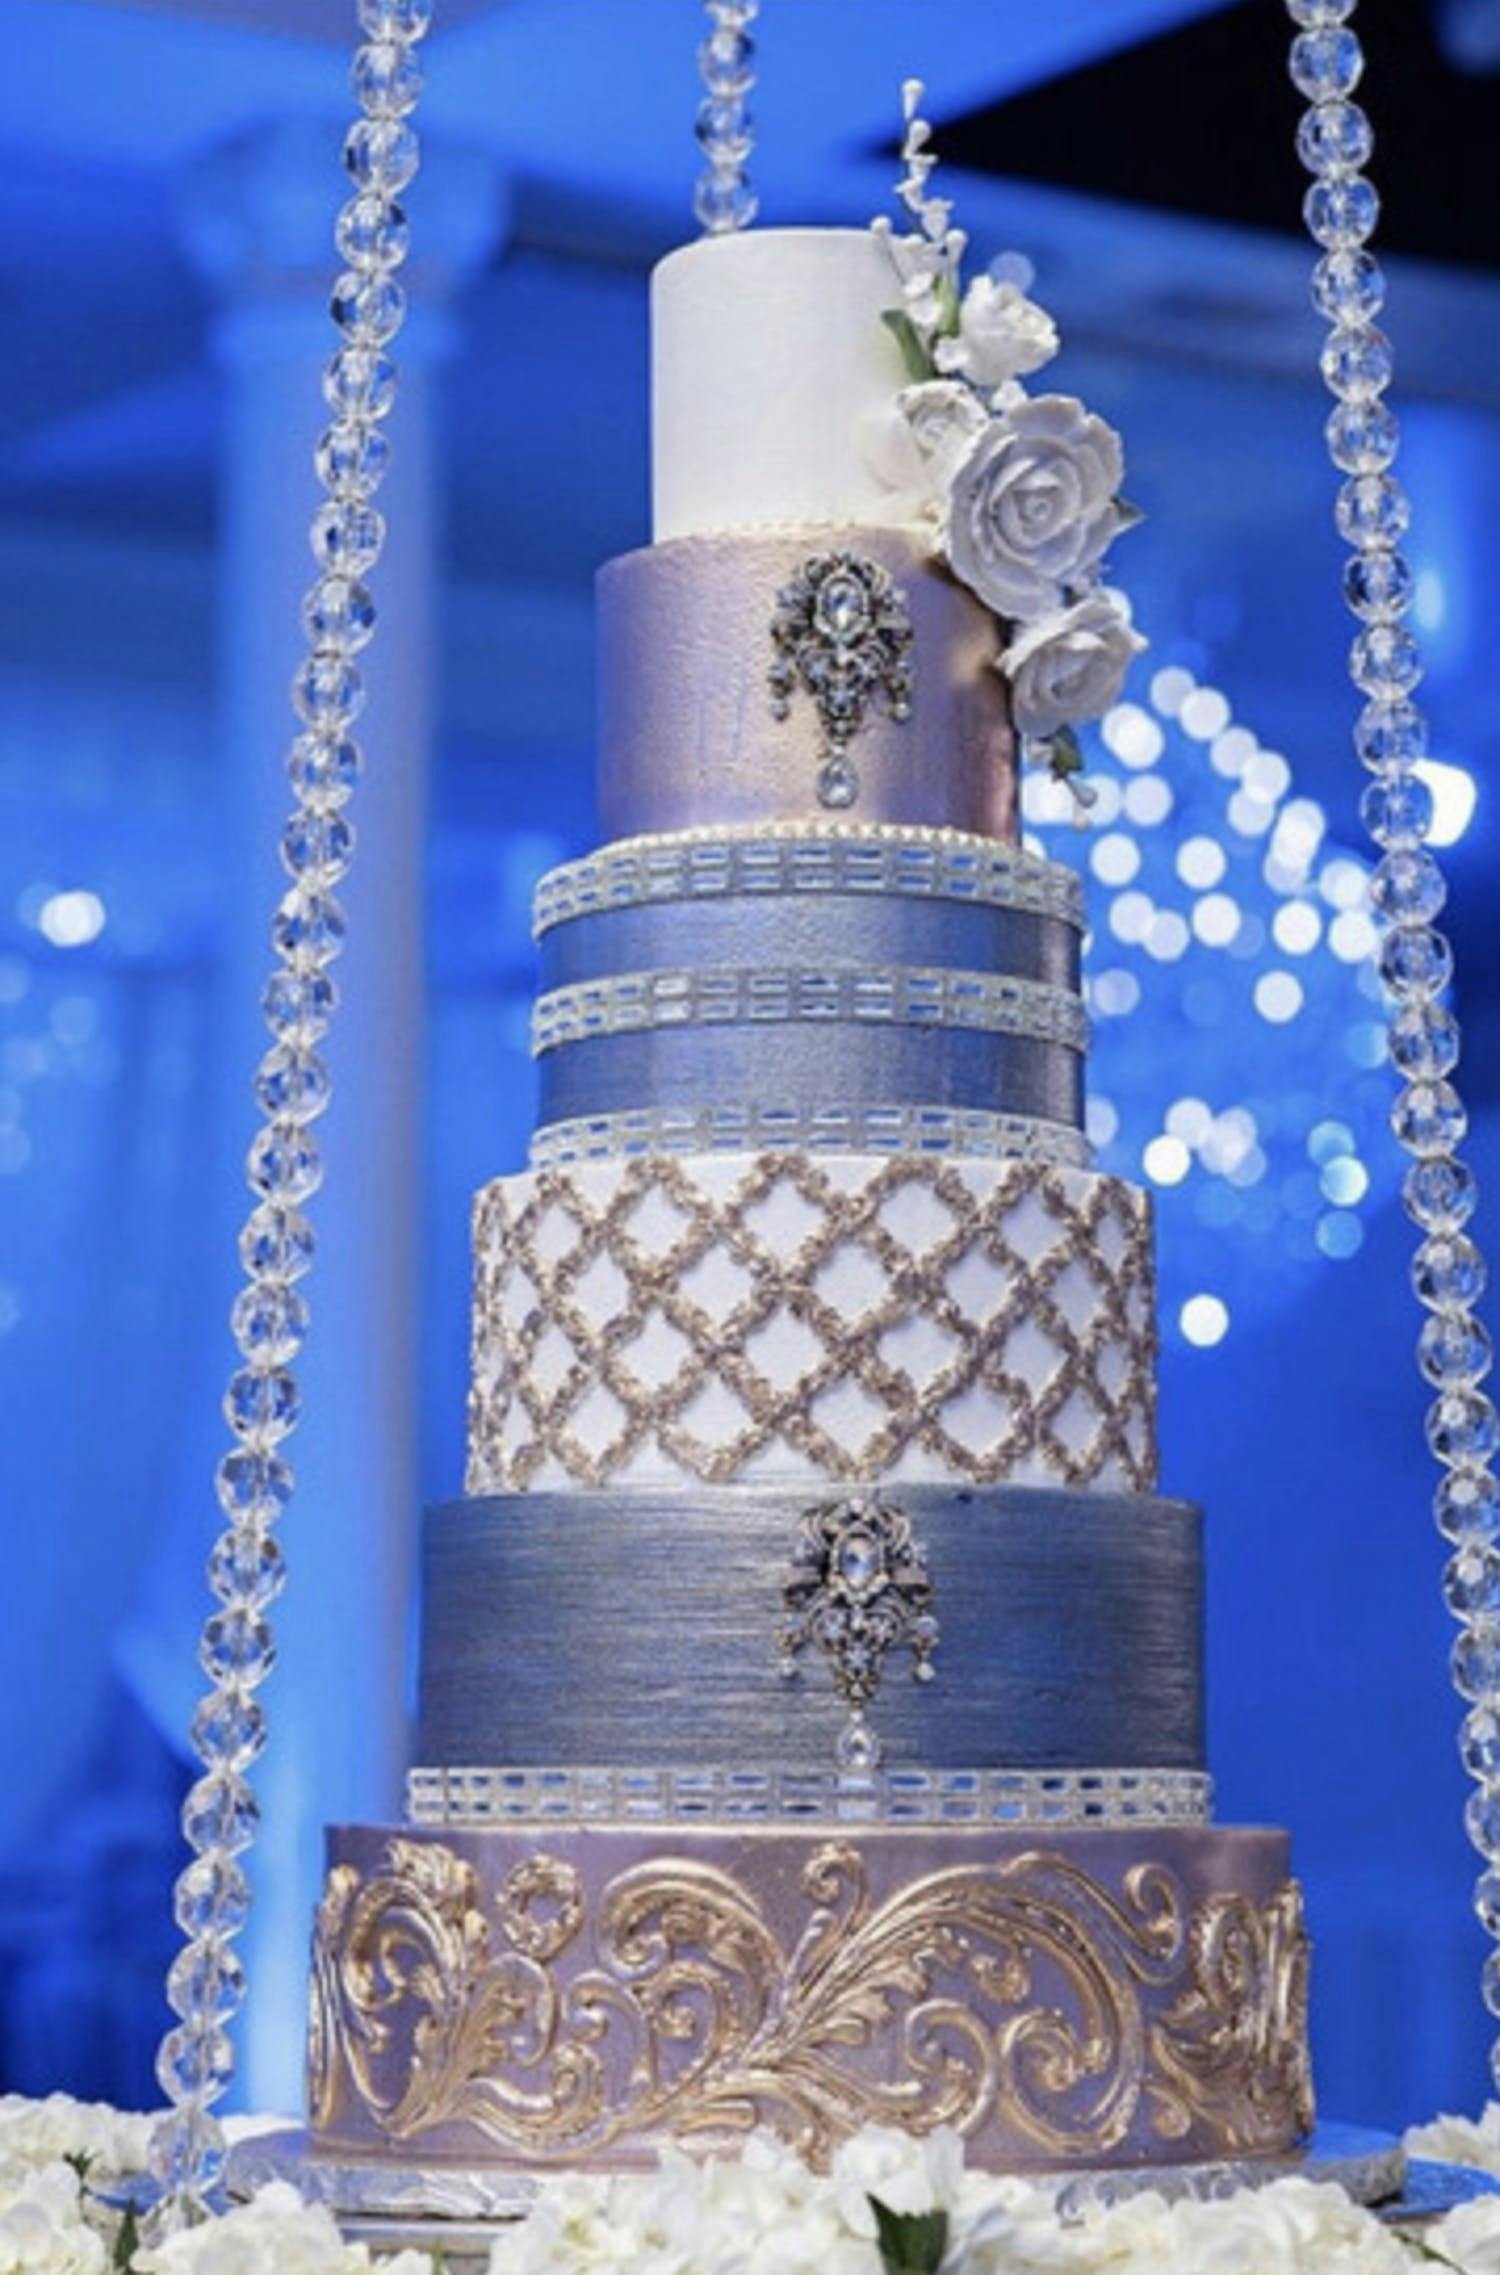 Six-tier metallic silver wedding cake with Jeweled Details | PartySlate